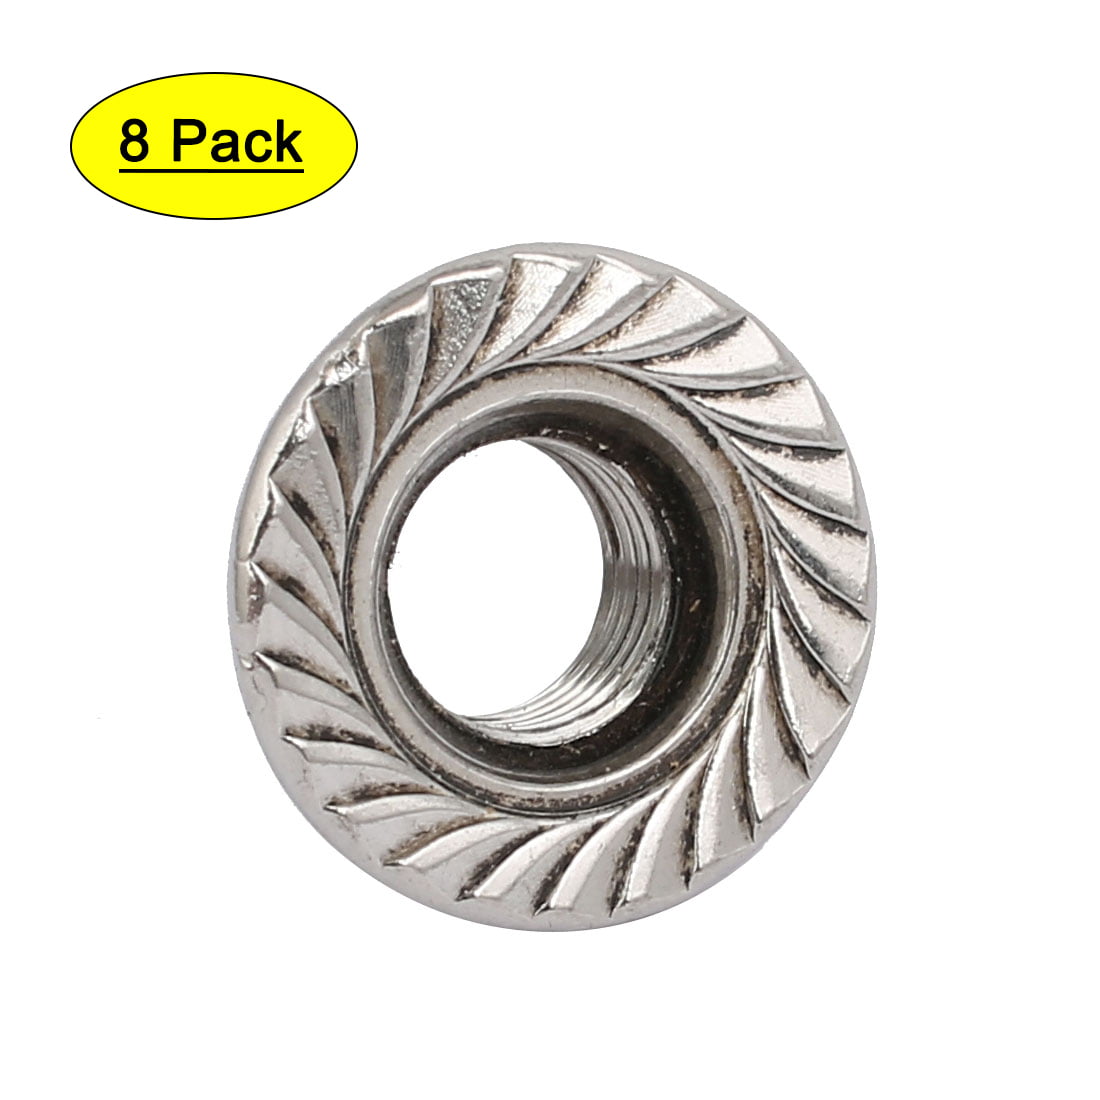 Left Hand\Fine Thread Flange Nuts 304 Stainless Steel Grade 2 For Metric Bolts 